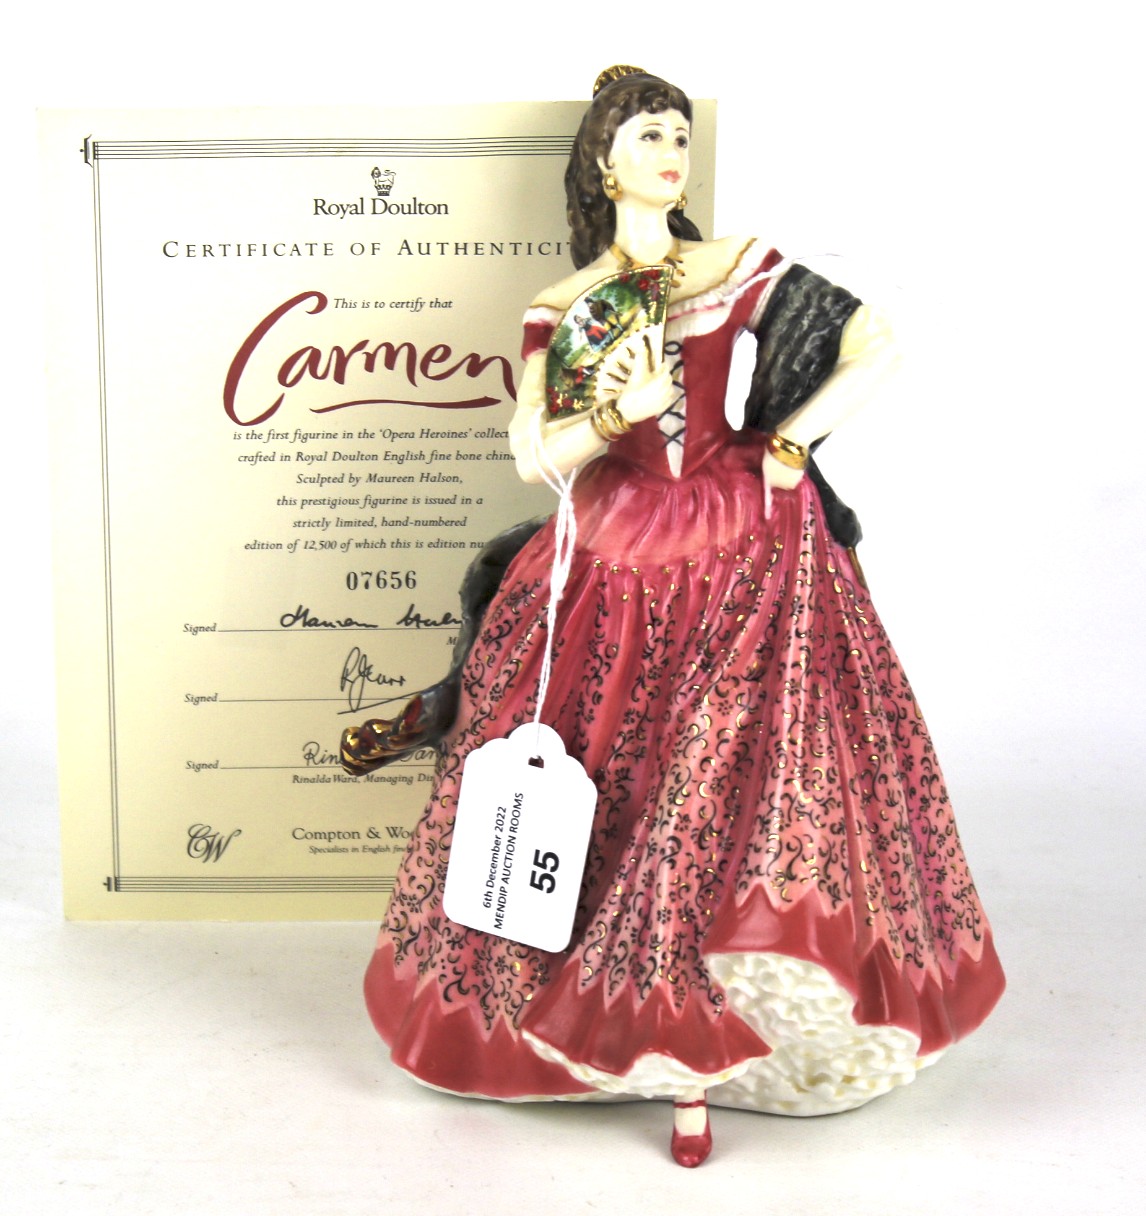 A limited edition Royal Doulton figure of 'Carmen'.